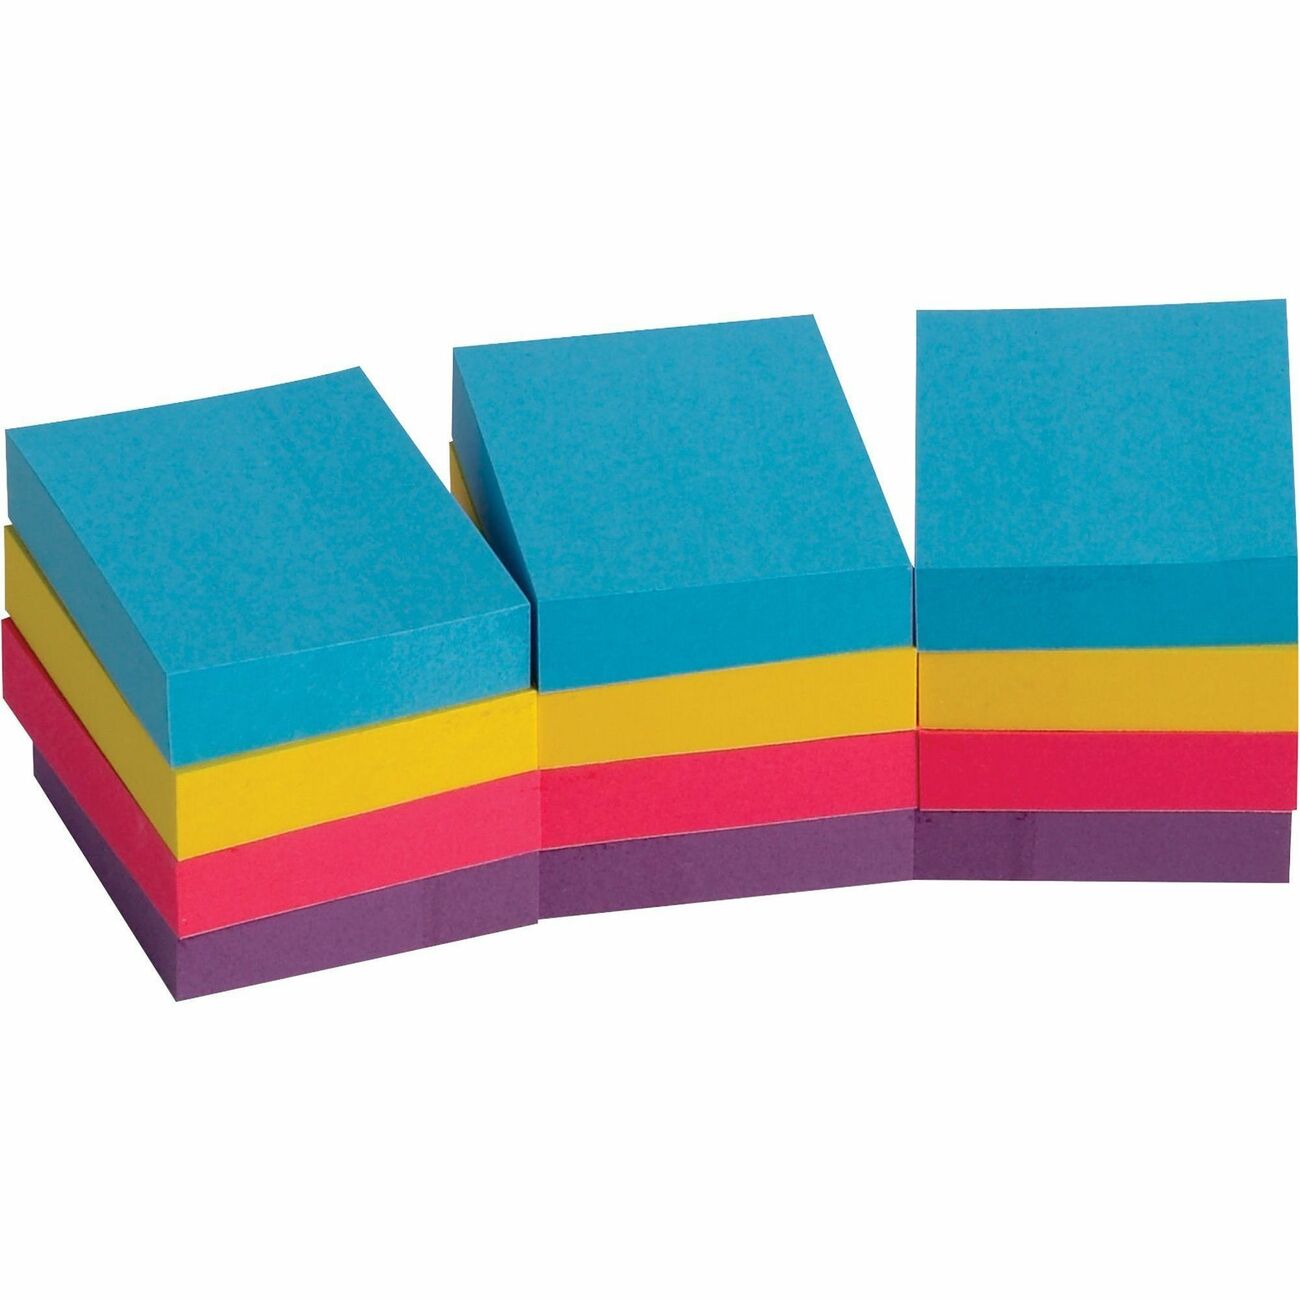 Self Adhesive Notes - Bright Colors